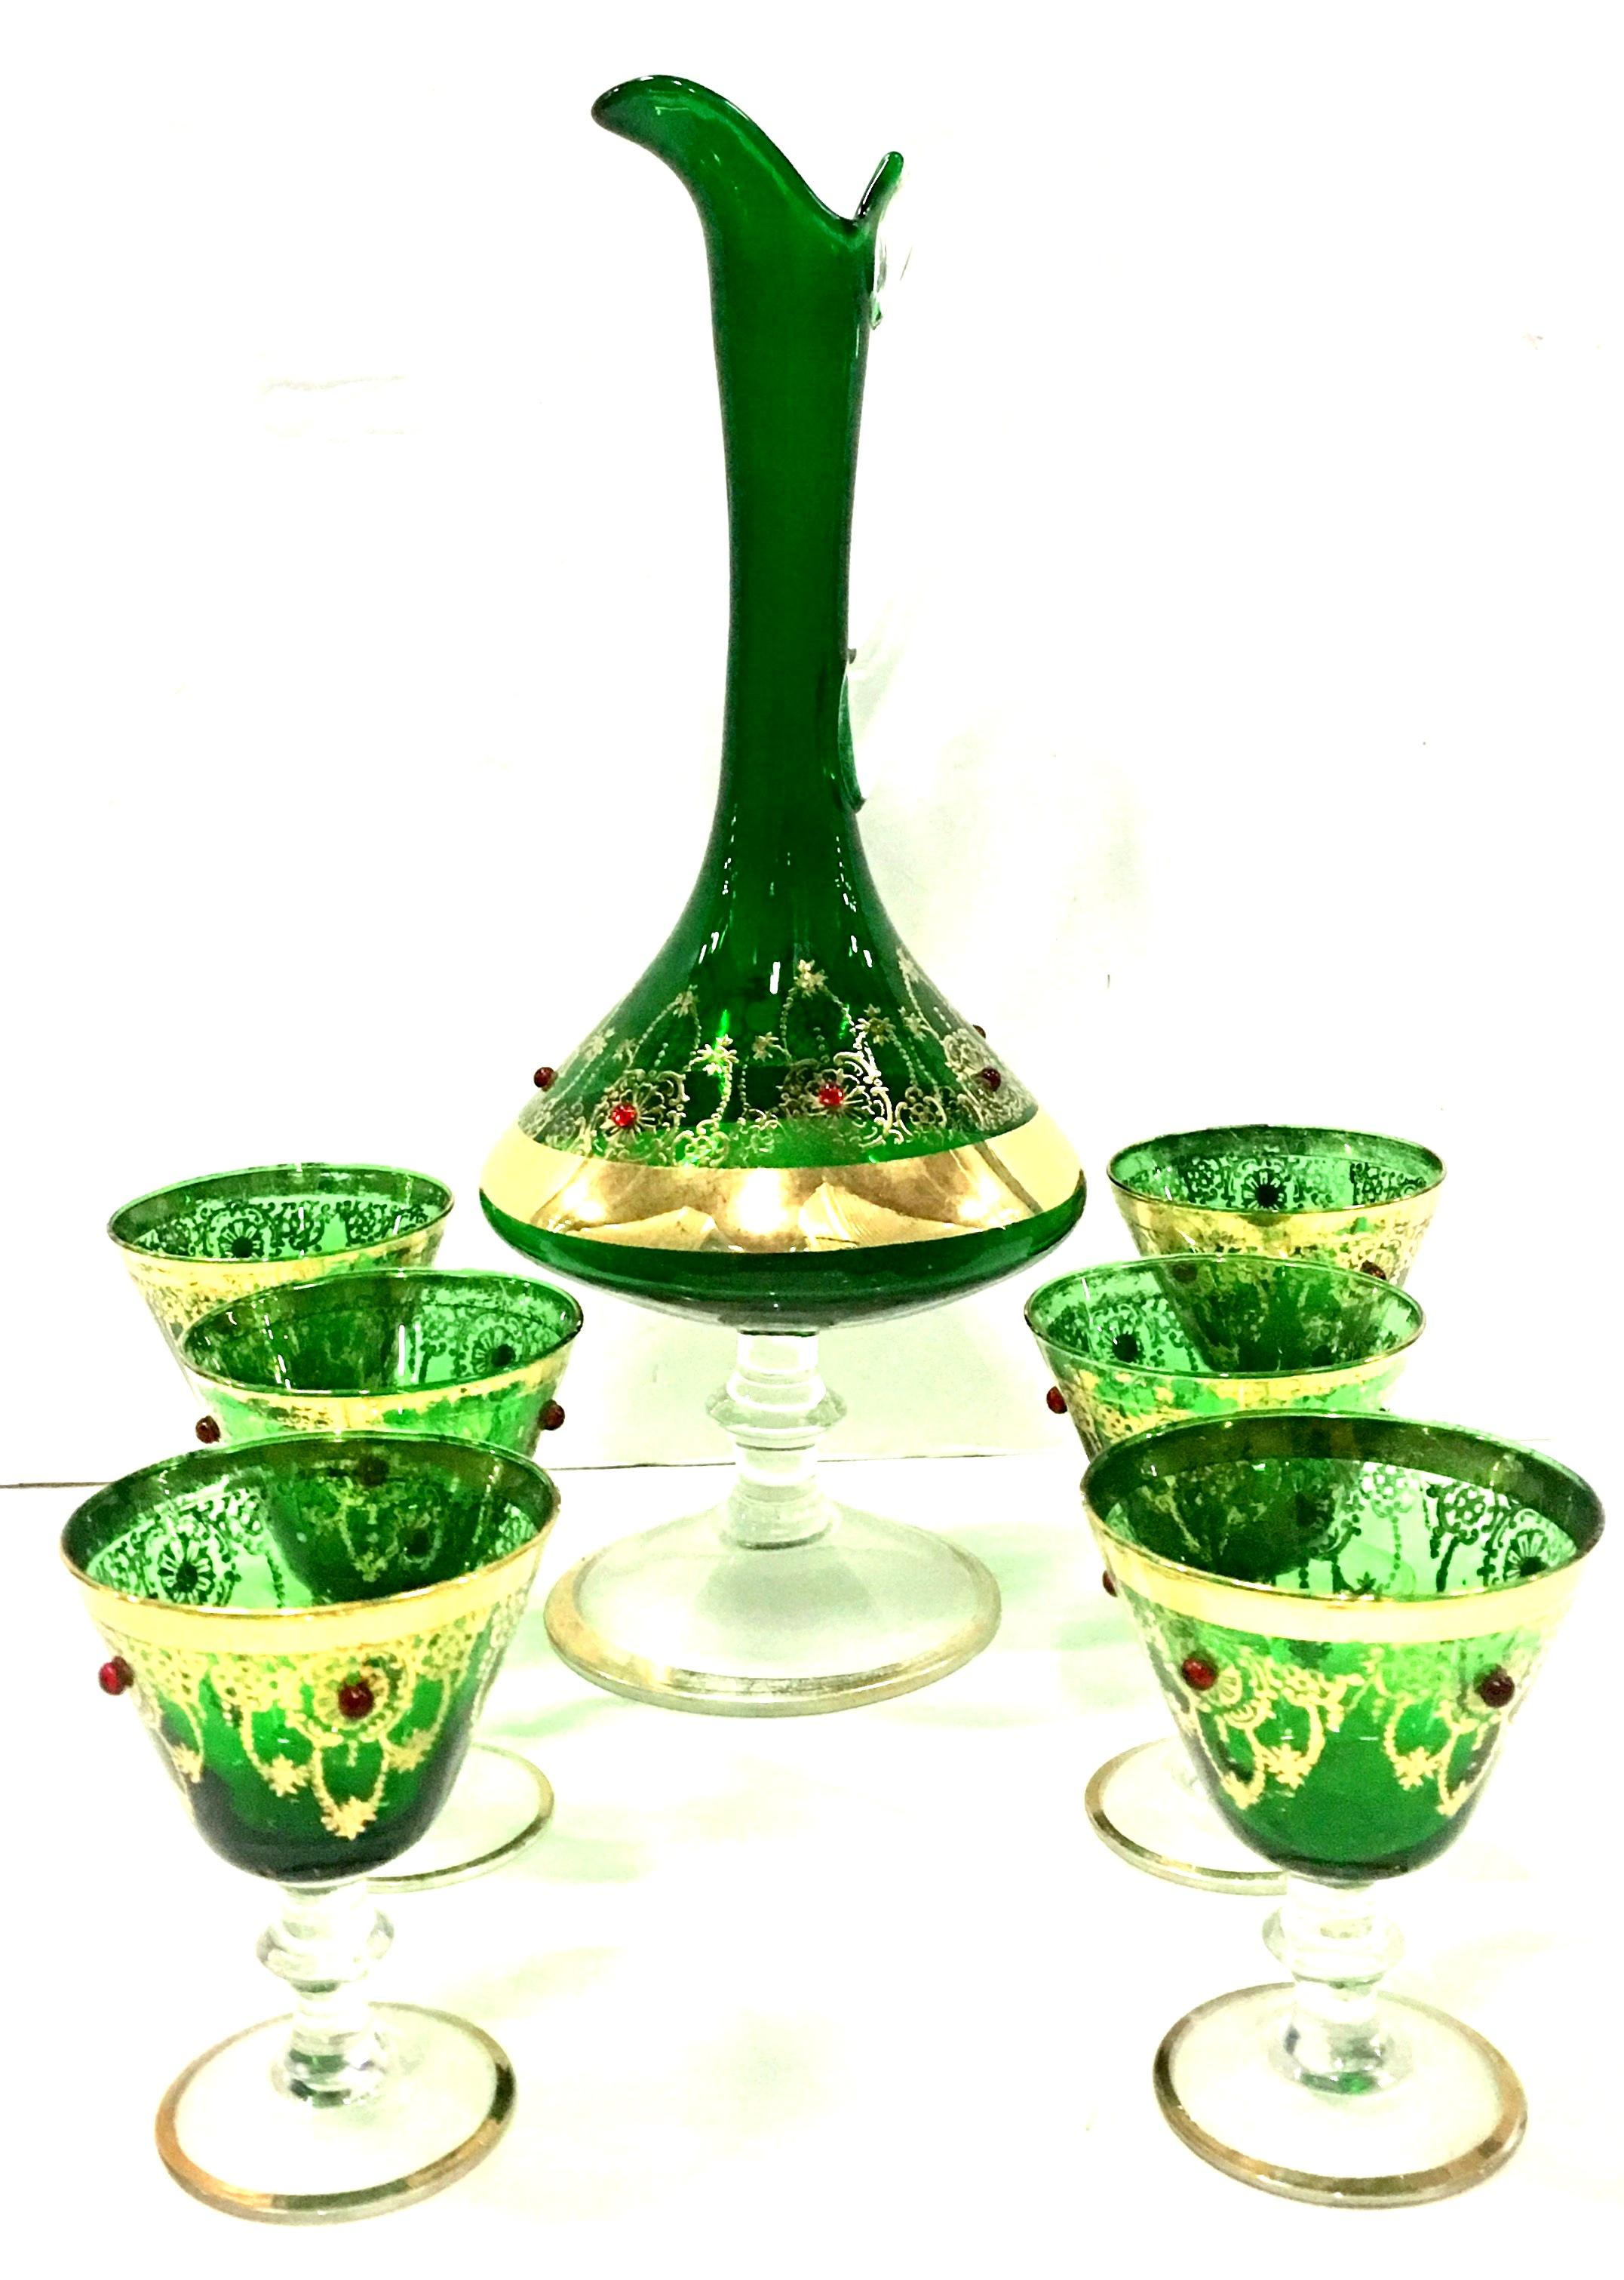 Mid-Century Italian 22 karat Gold & Emerald Green Venetian Glass Drinks Set Of Seven Pieces. This hand-painted seven piece set features a spouted and applied handled footed pitcher and six cordial footed stem glasses. The 22 karat gold scroll and